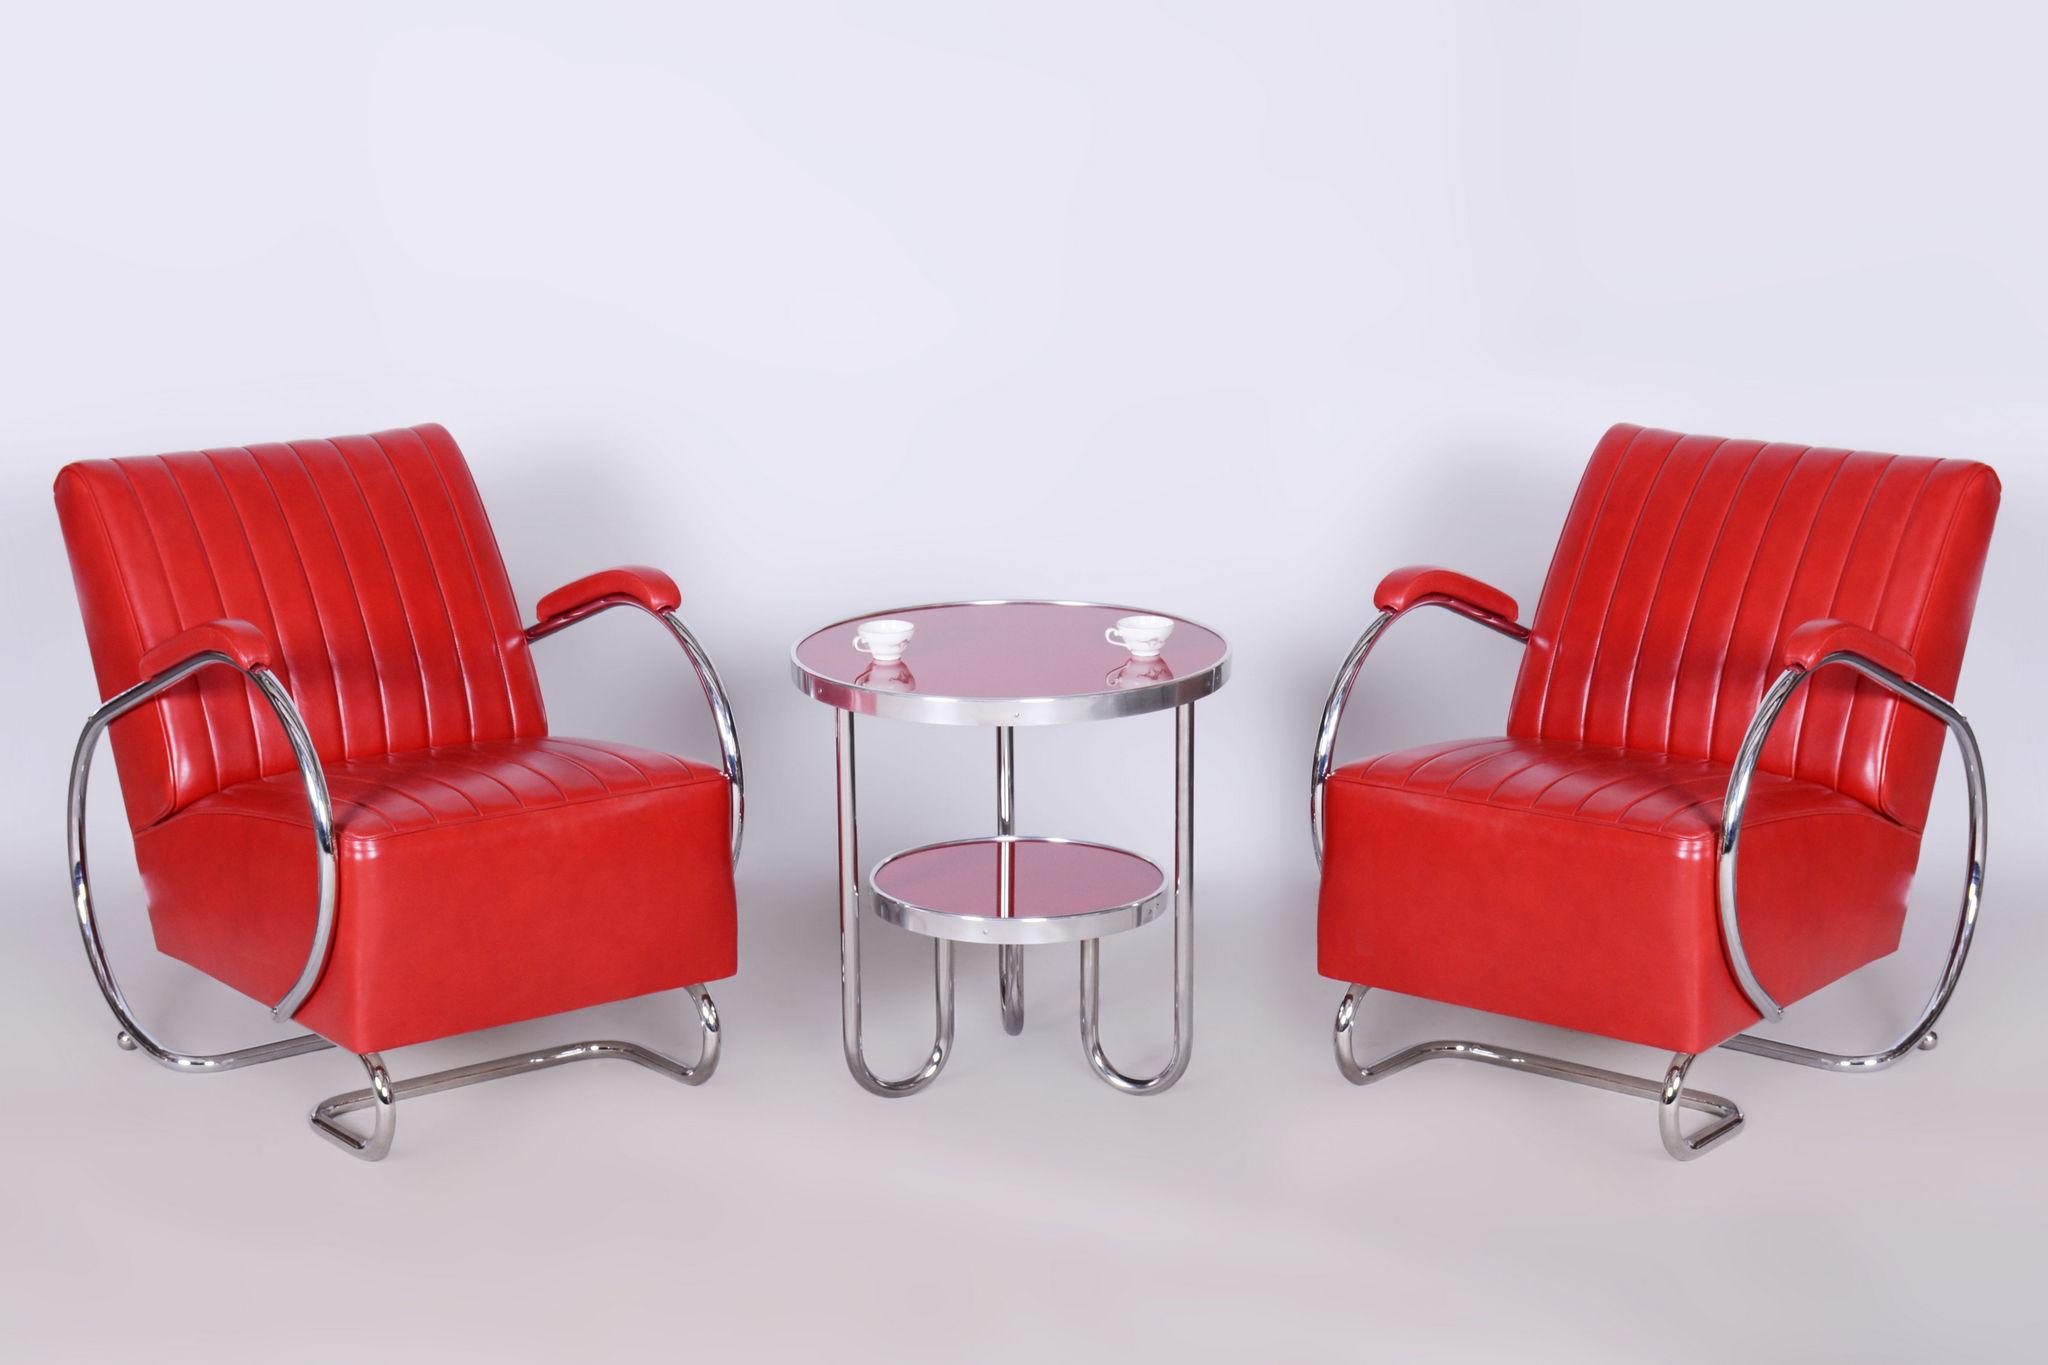 Restored Bauhaus Pair of Armchairs.

Maker: Hynek Gottwald
Source: Czechia (Czehoslovakia)
Period: 1930-1939
Material: Chrome-plated Steel, Leather

The chrome parts have been cleaned and professionally restored. 

The new upholstery is high quality